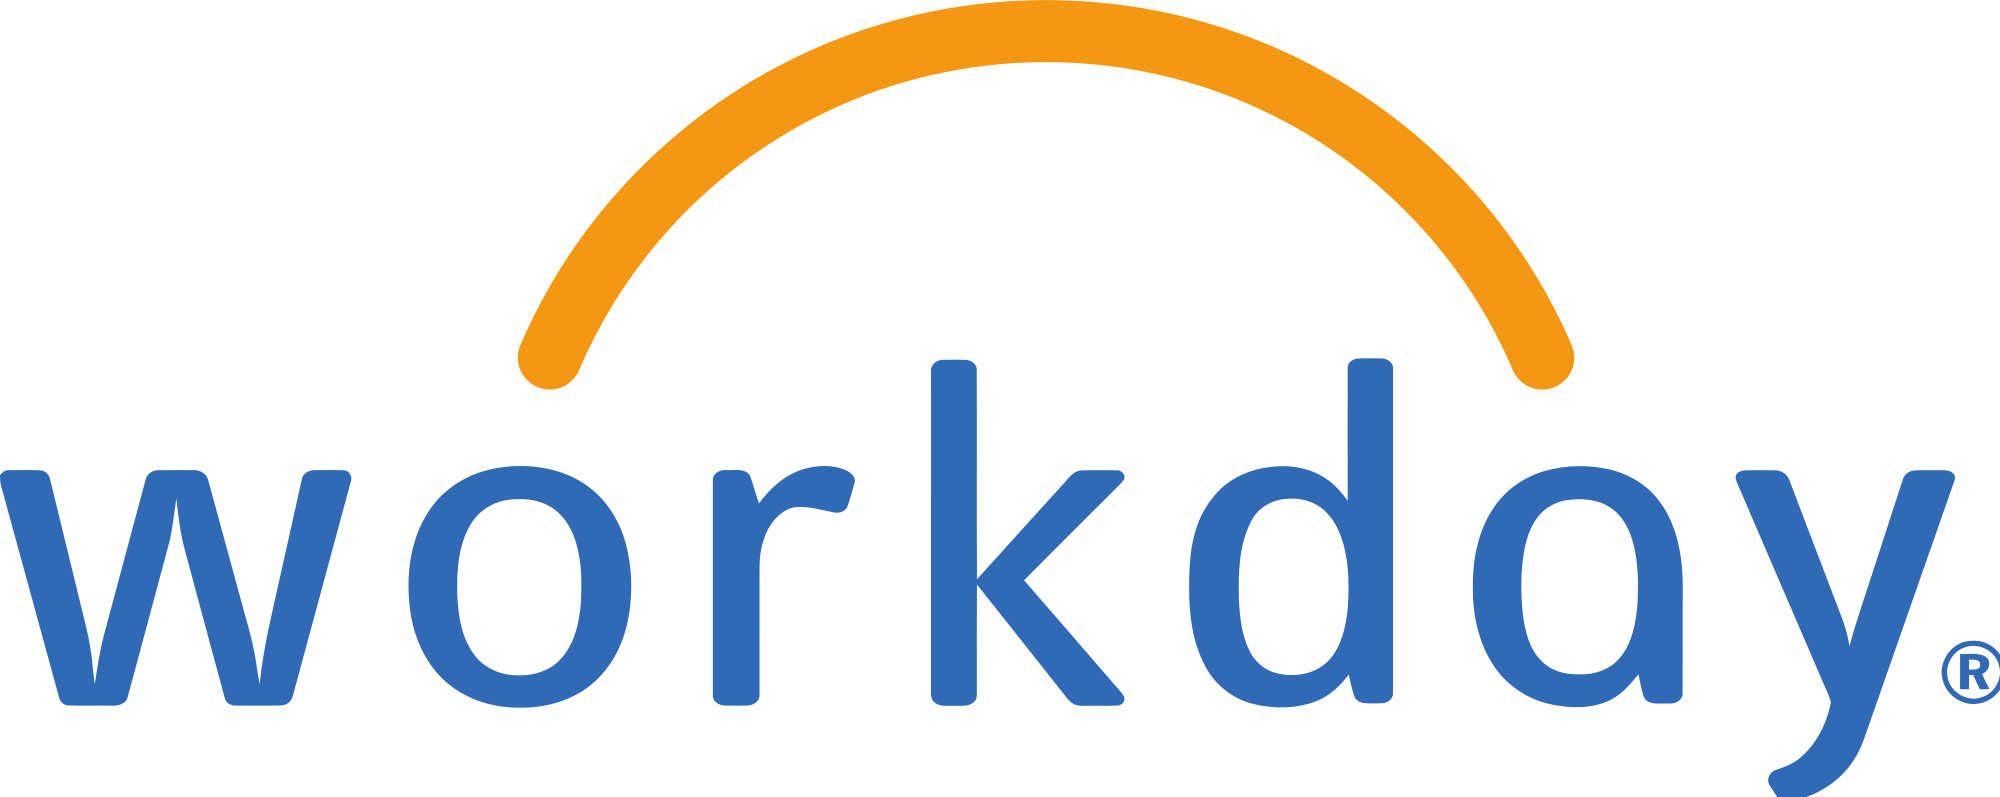 Workday_logo.png